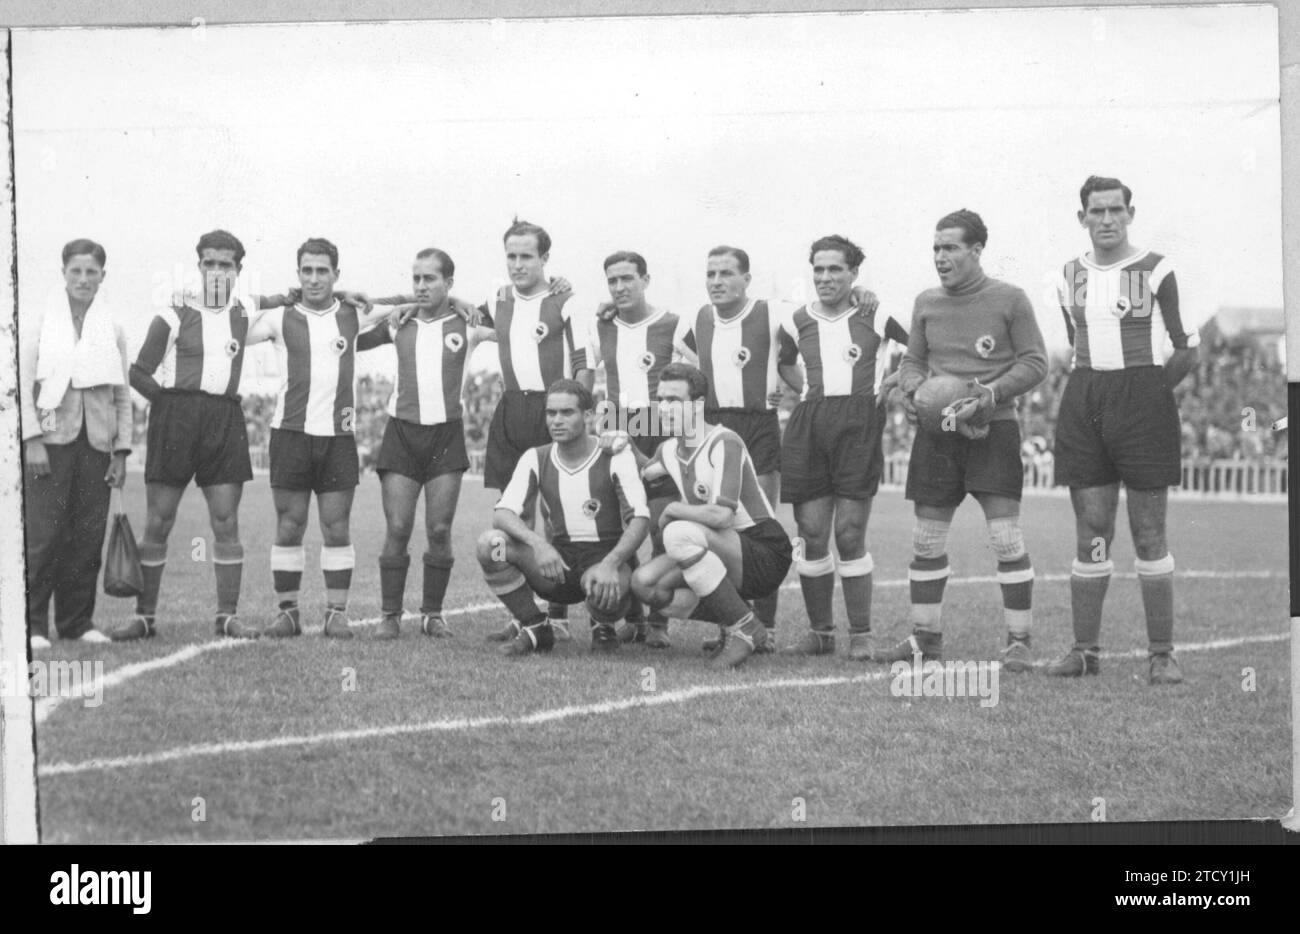 12/31/1929. Hercules de Alicante team that played against Celta in a match in which victory earned them the second division championship and promotion to the first league. From left to right: Salvador, Maciá, Tatono, Blazquez, Irles, Deniz, Roldán, Perez and Moro. Kneeling, Múgica and Orriels. Credit: Album / Archivo ABC / Luis María Caruncho Amat Stock Photo